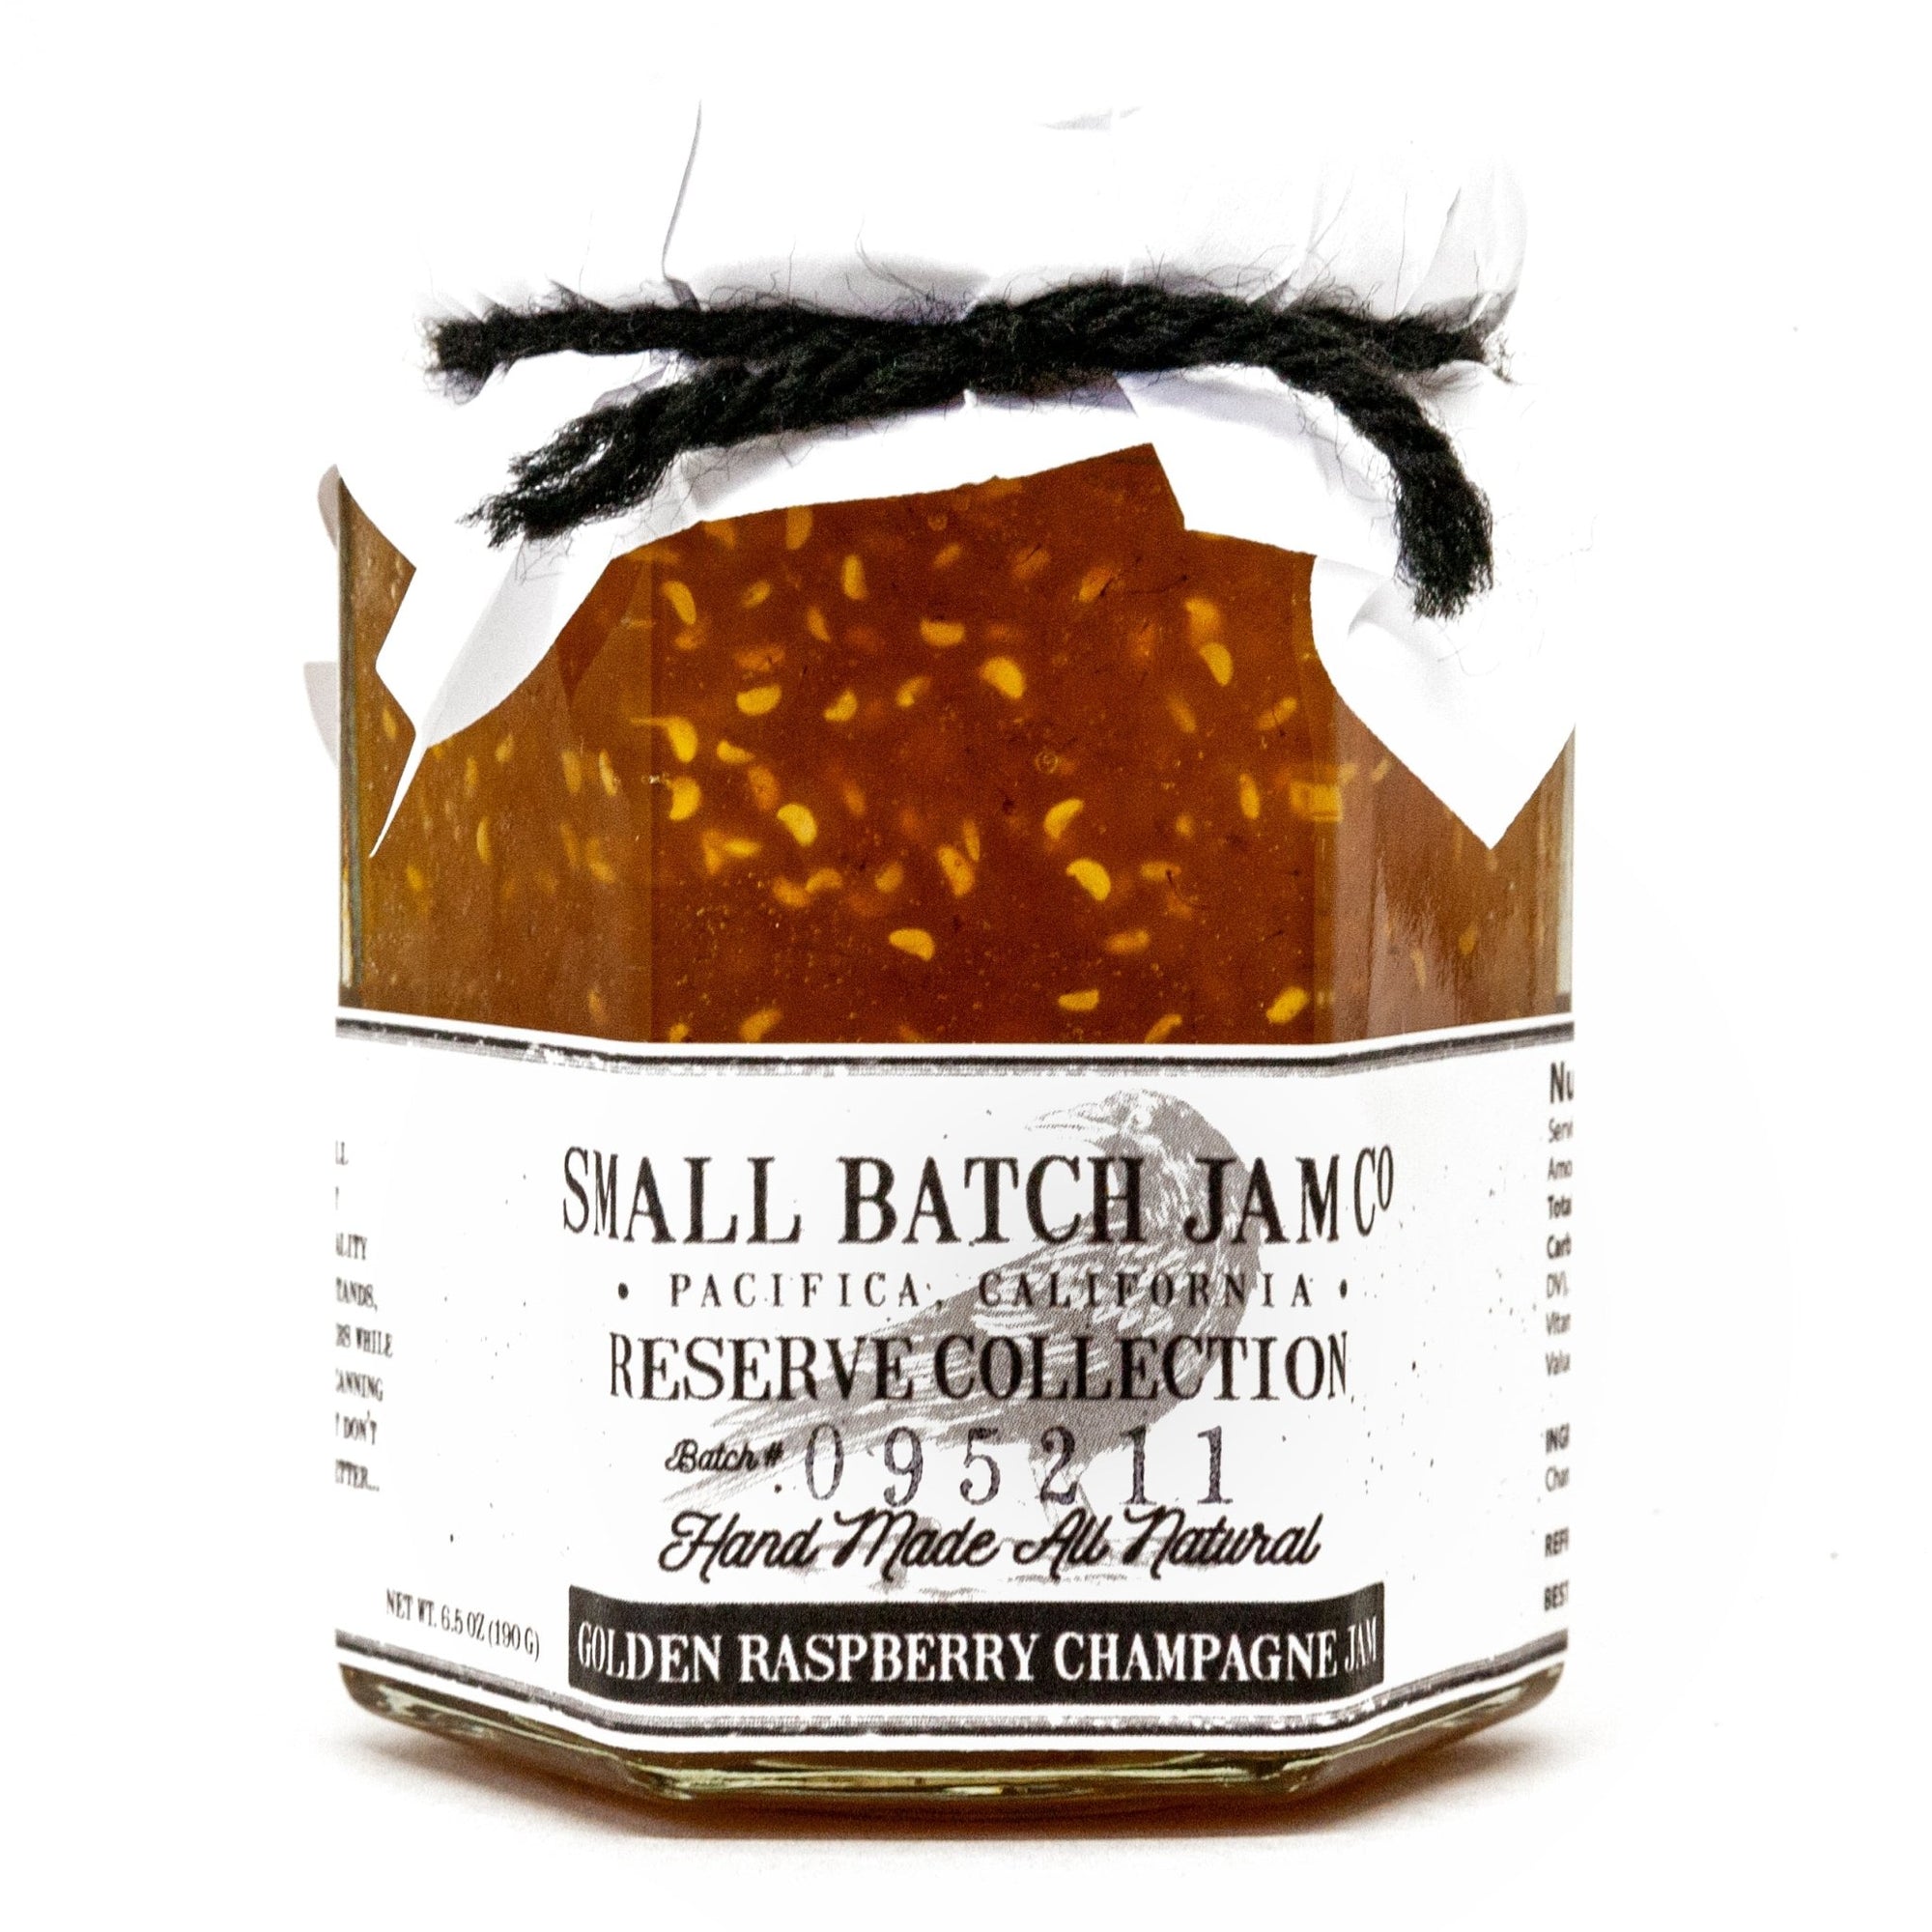 Golden Raspberry Champagne Jam - Reserve Collection - Small Batch Jam Co